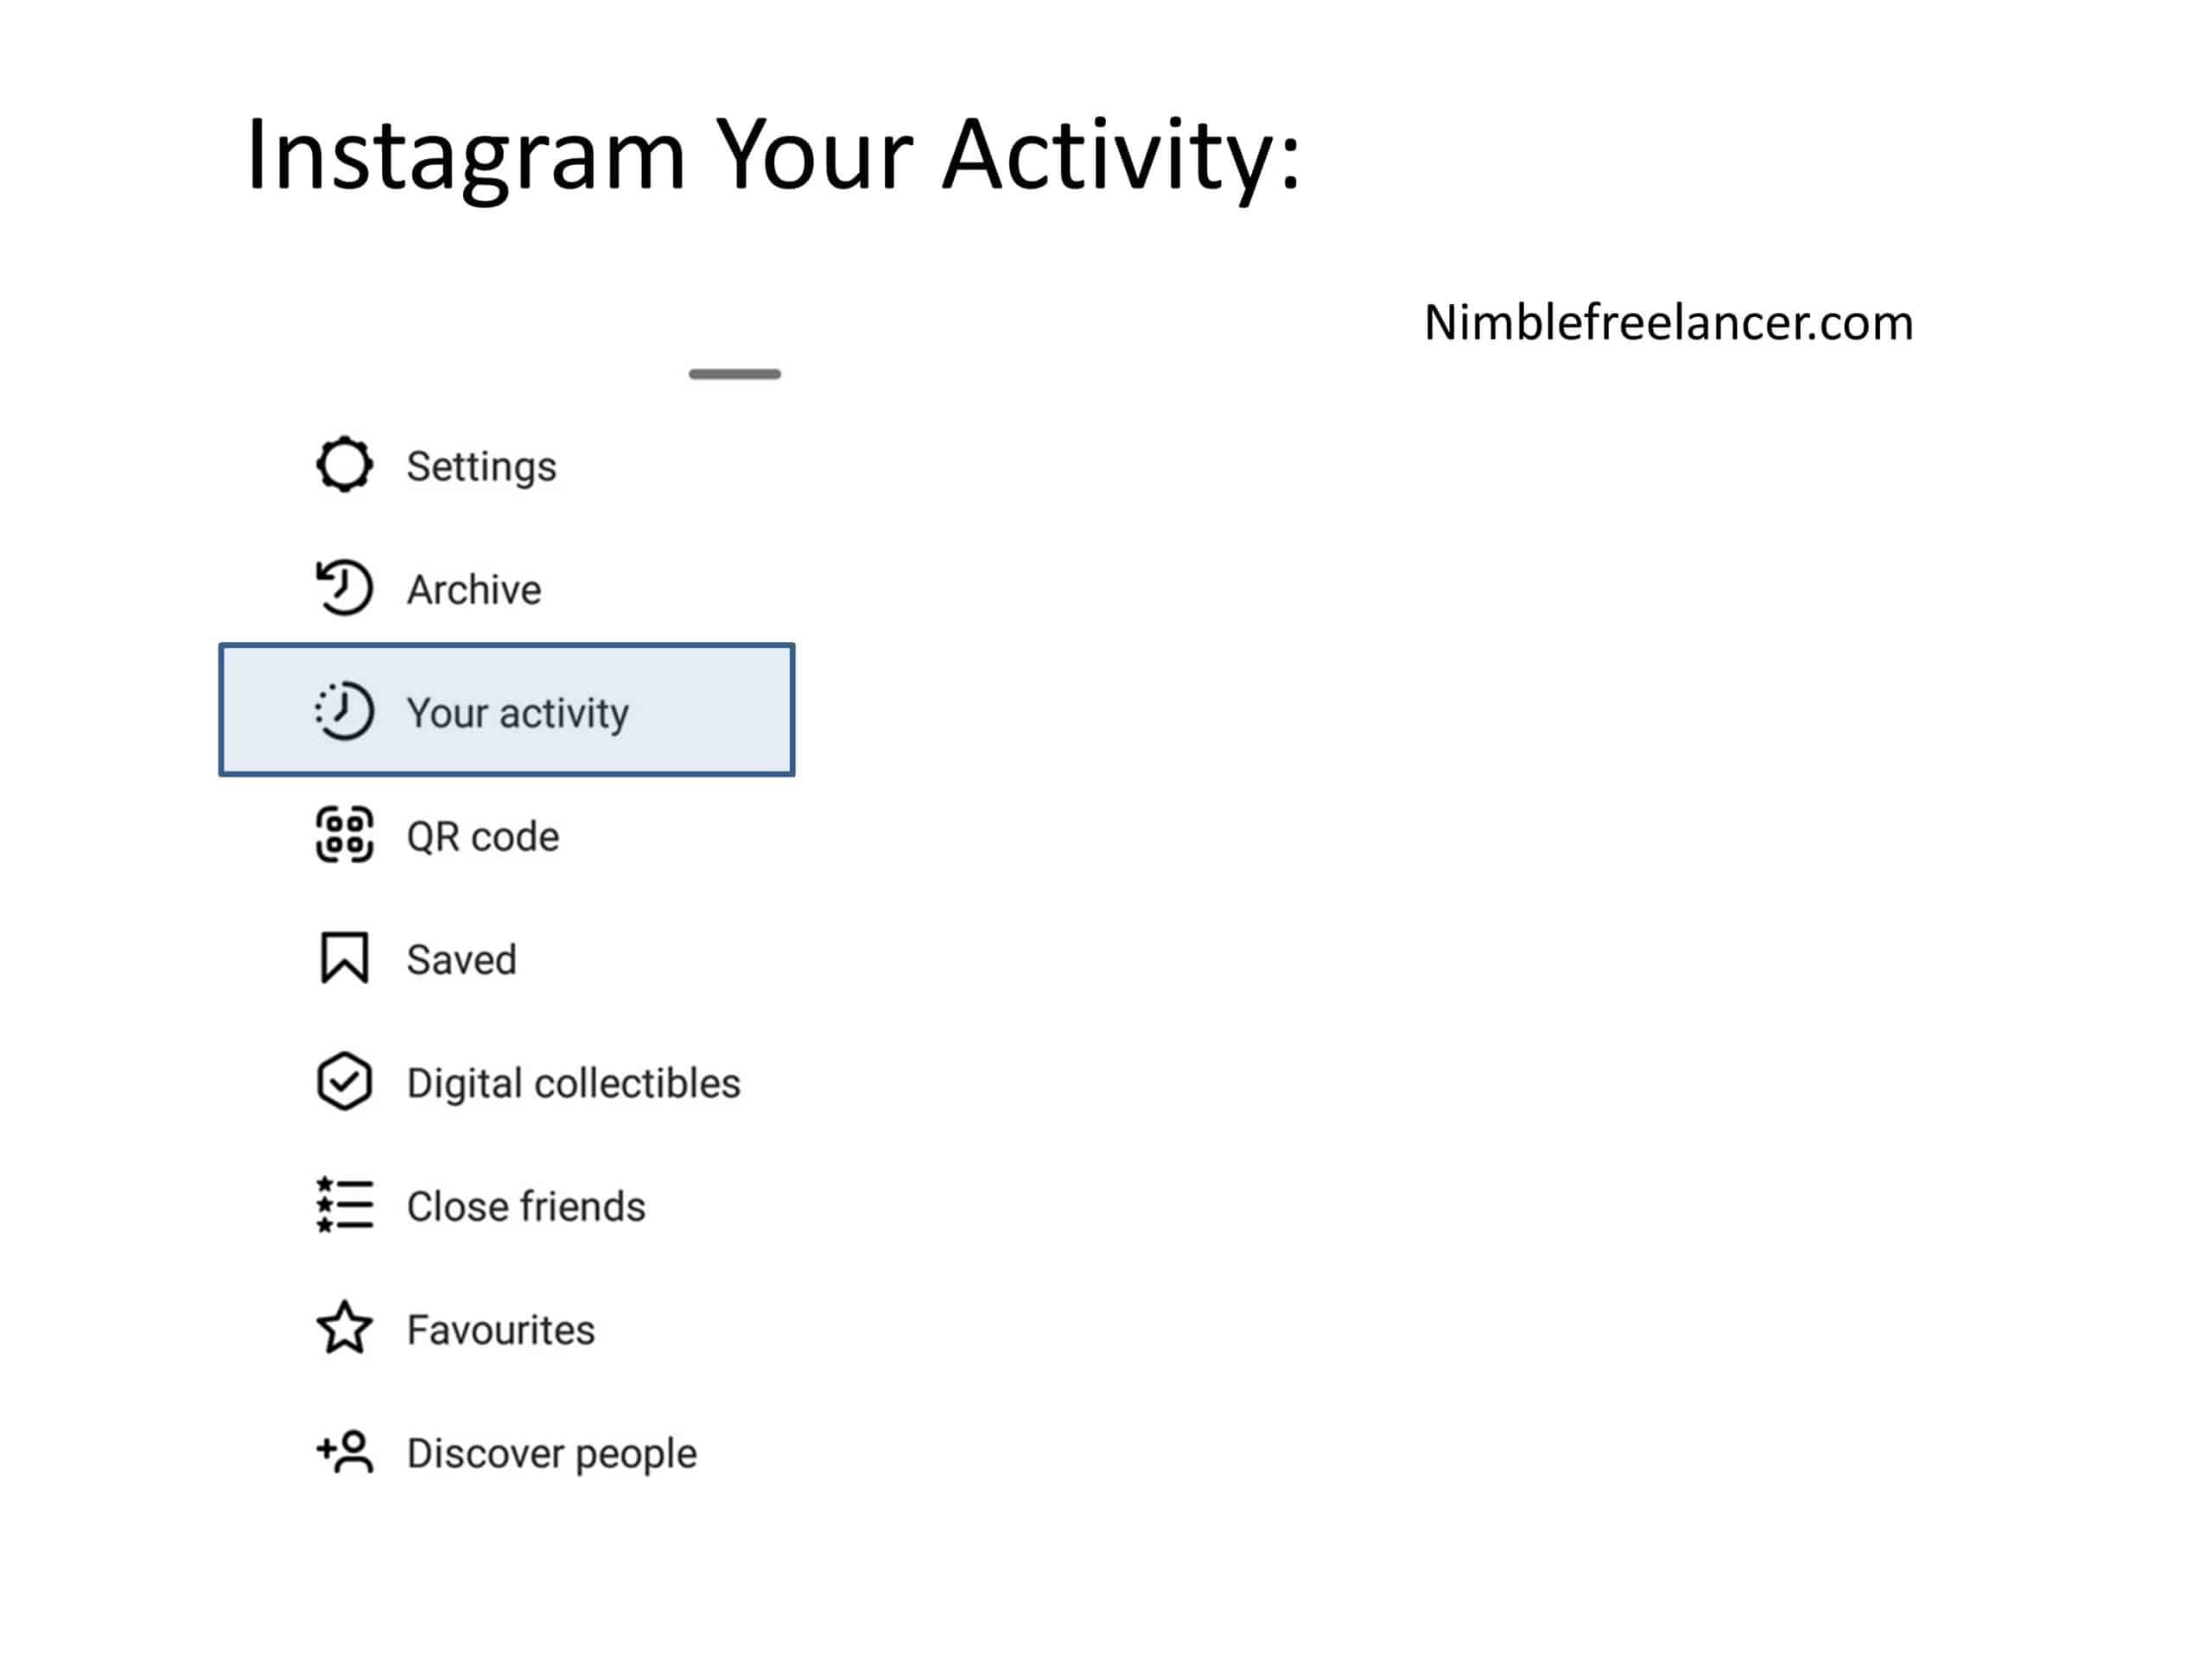 Your activity at Instagram app